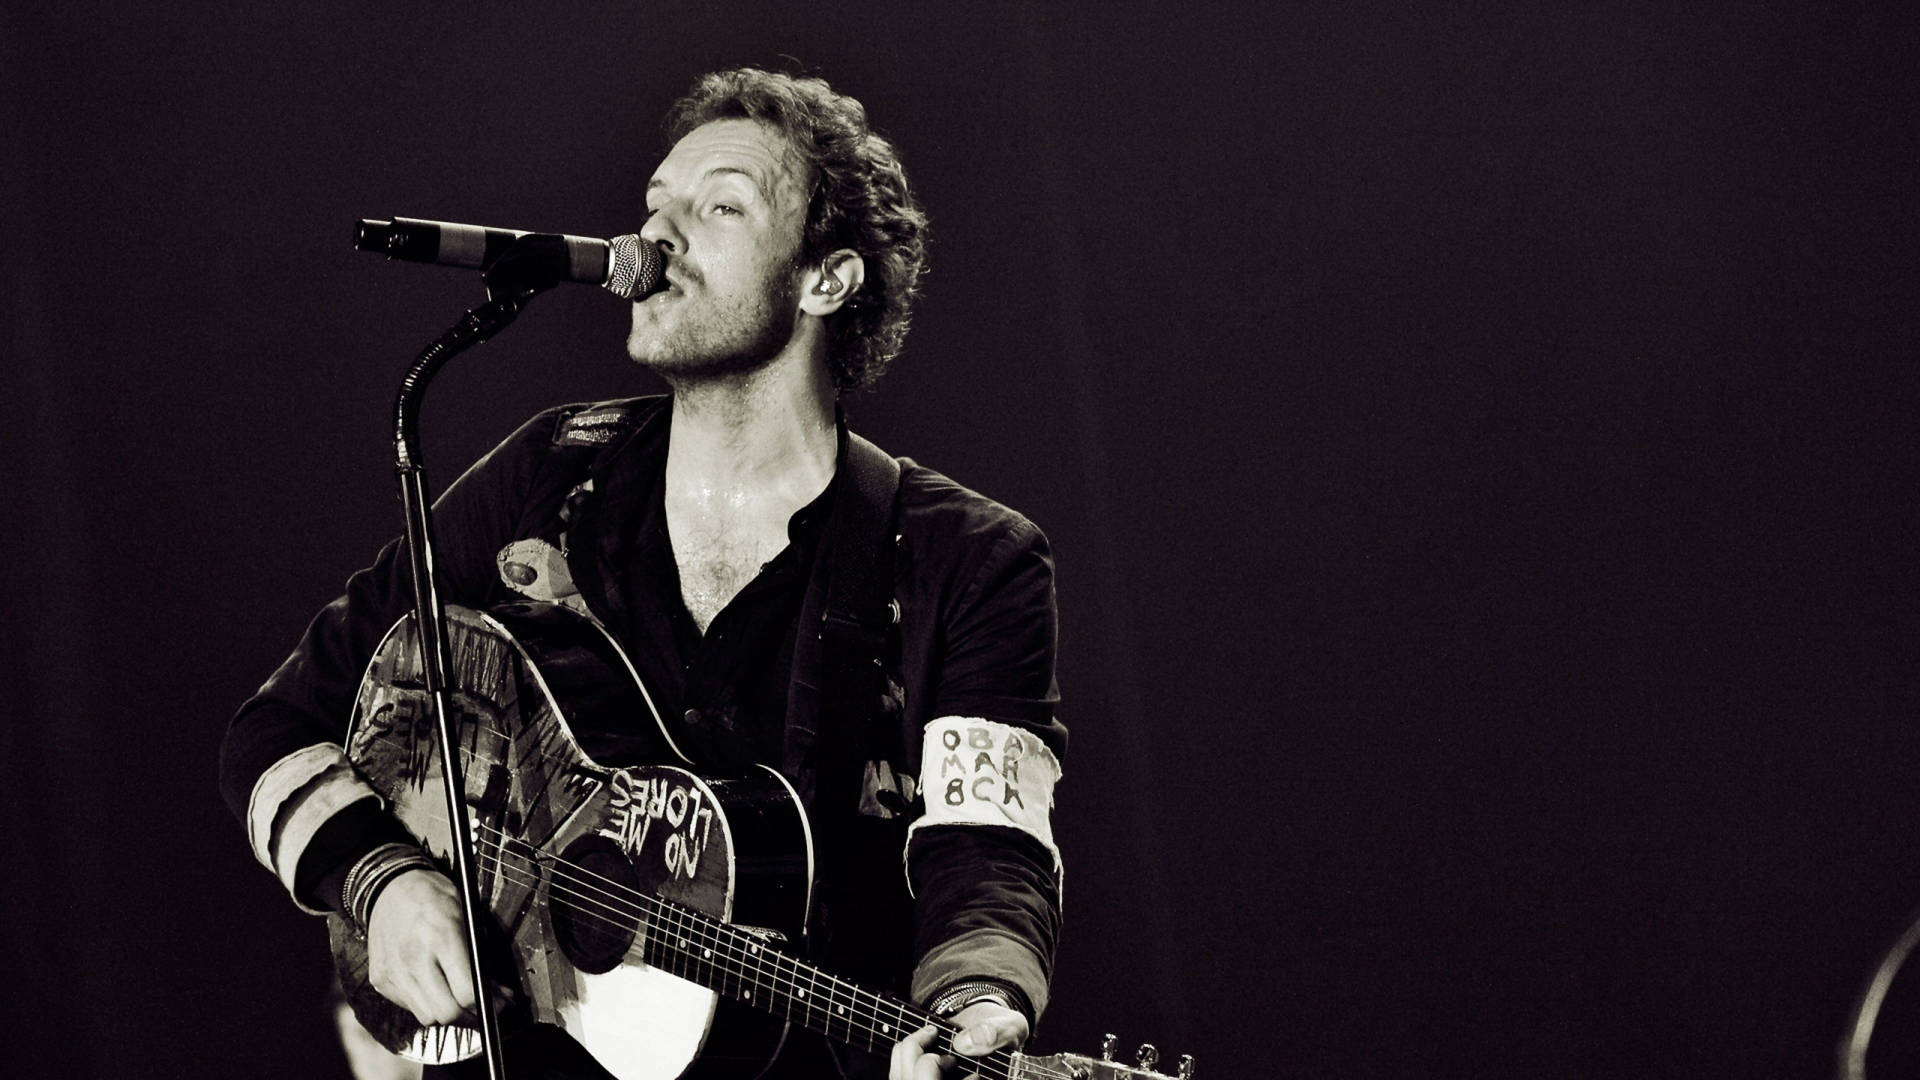 Chris Martin Coldplay Black And White Background